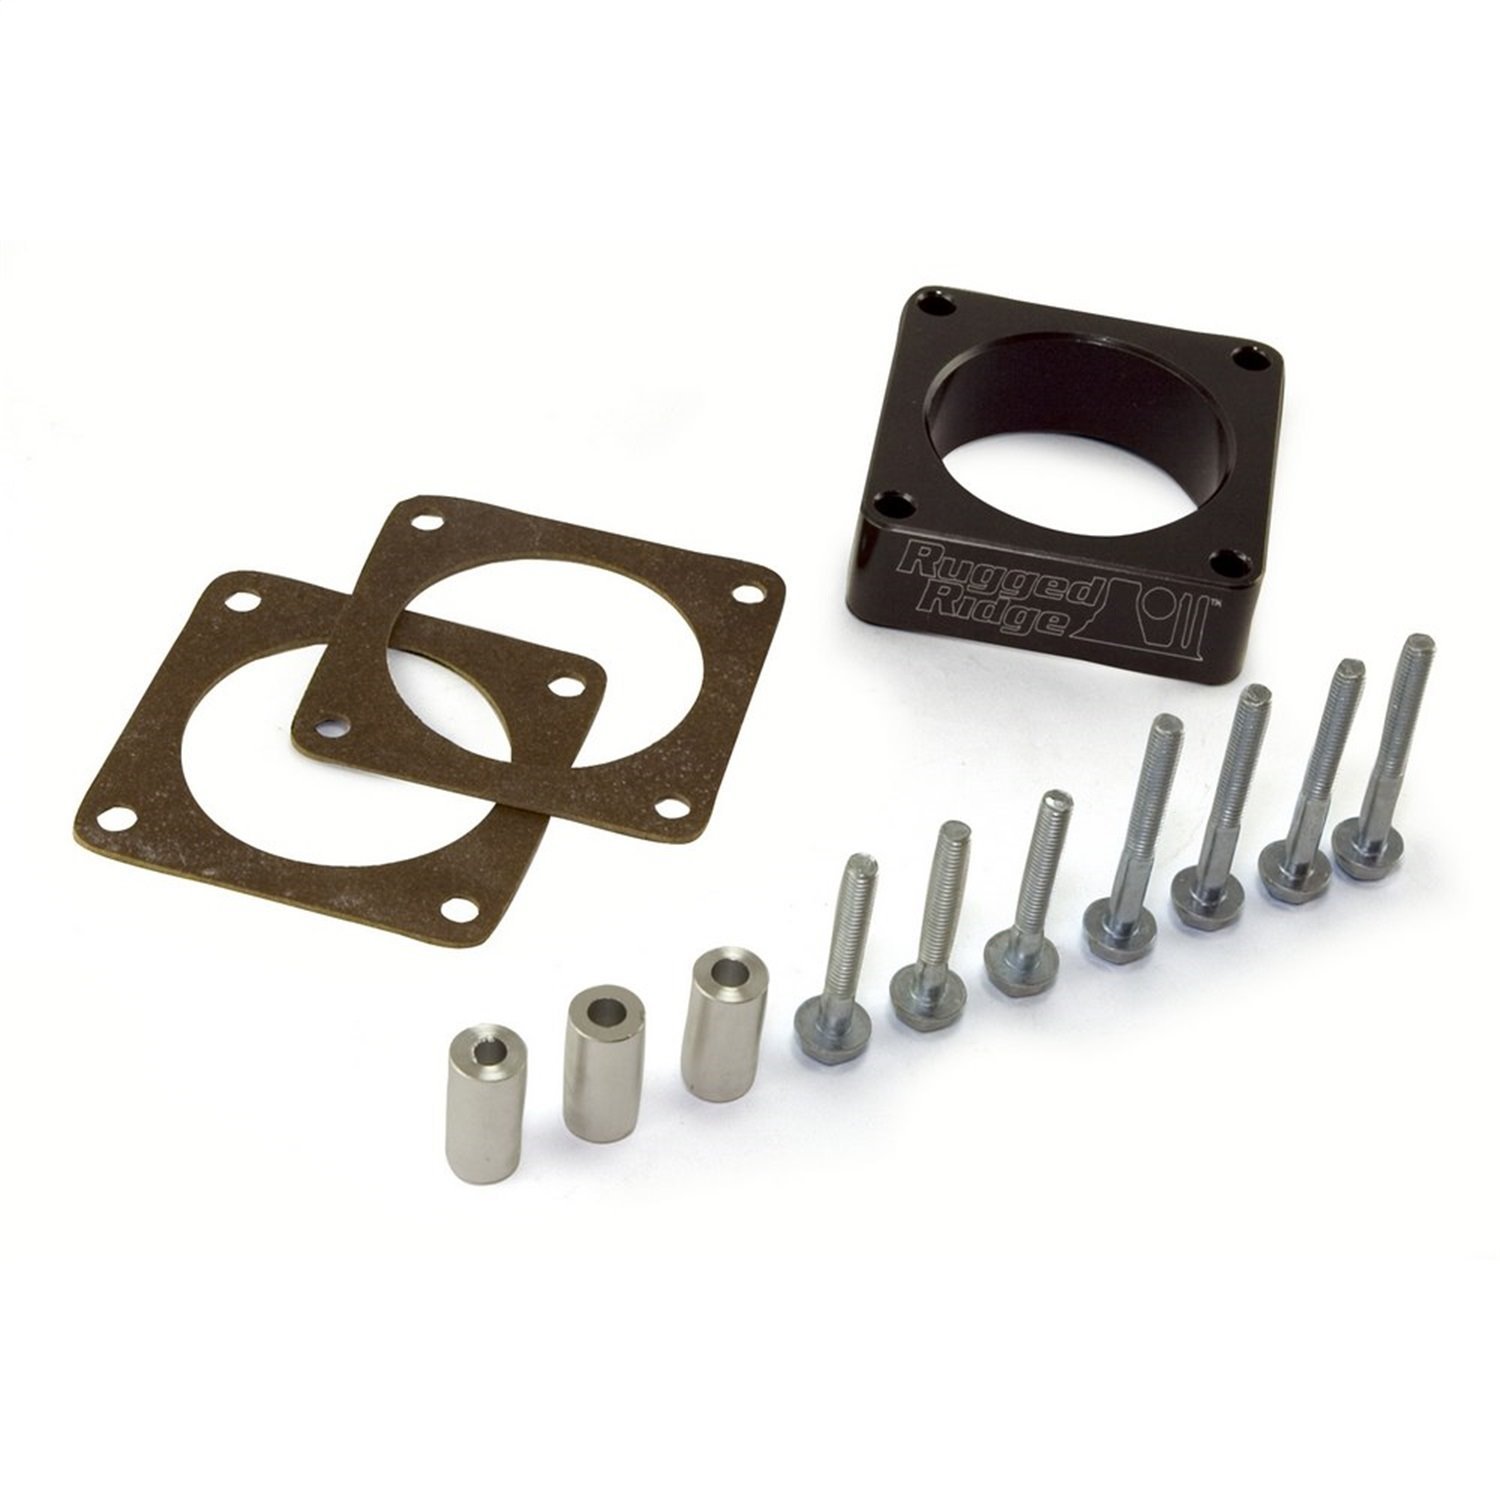 Throttle Body Spacer for 1991-2006 Jeep Wrangler YJ/TJ and Cherokee XJ